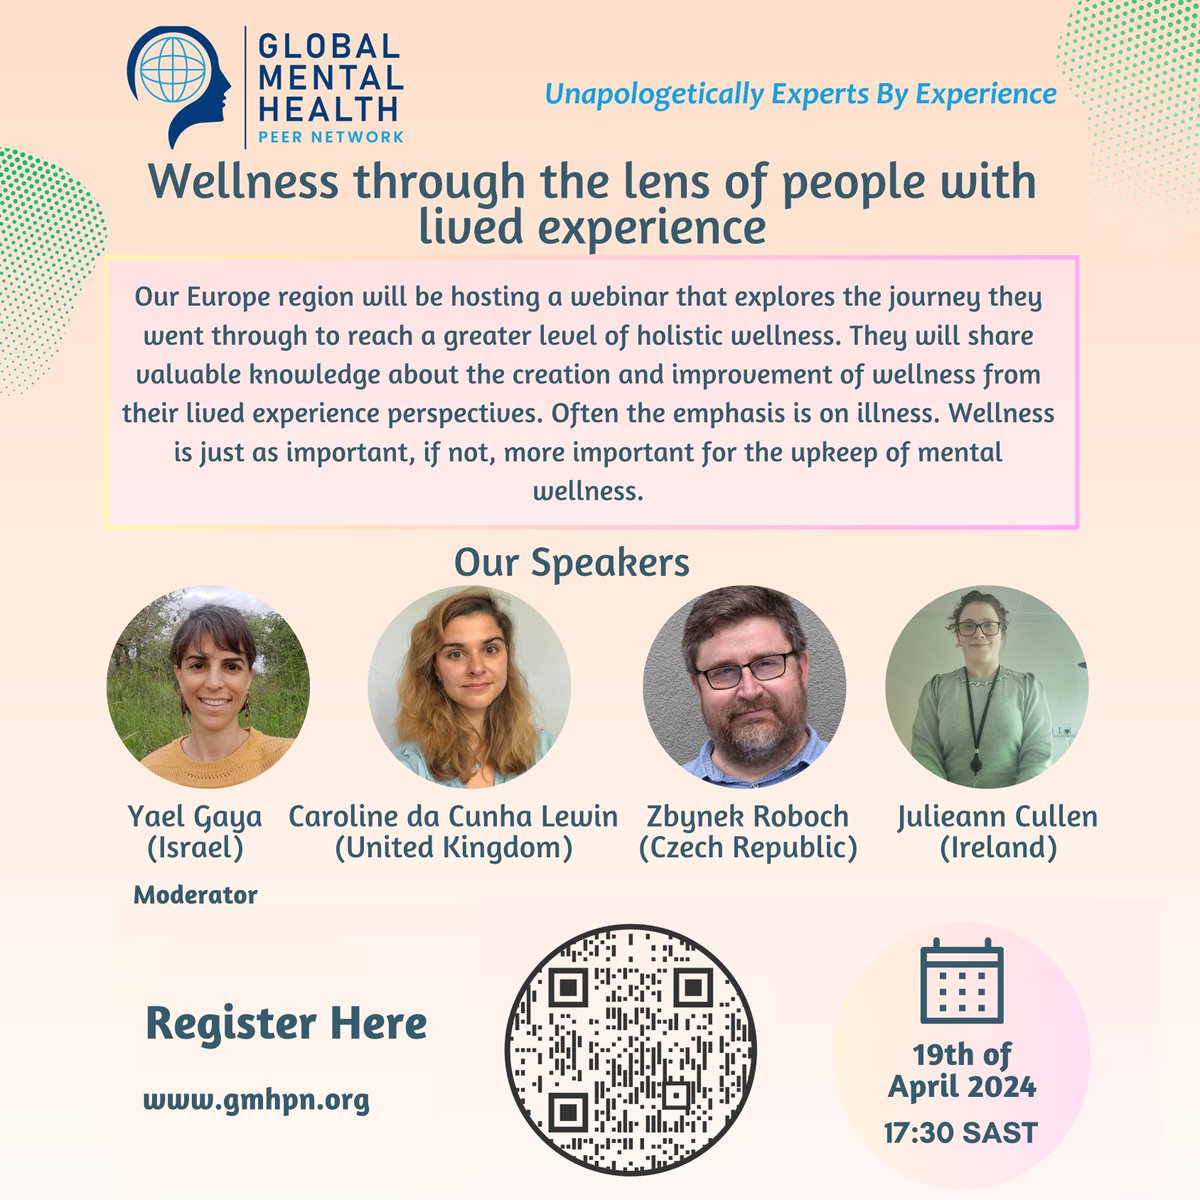 Our European region, chaired by Yael Gaya, hosts a webinar tomorrow, April 19th, at 5:30 pm SAST, focusing on Wellness through lived experiences. Join us to gain valuable insights from our members and share them with your network. Register here: us06web.zoom.us/meeting/regist…